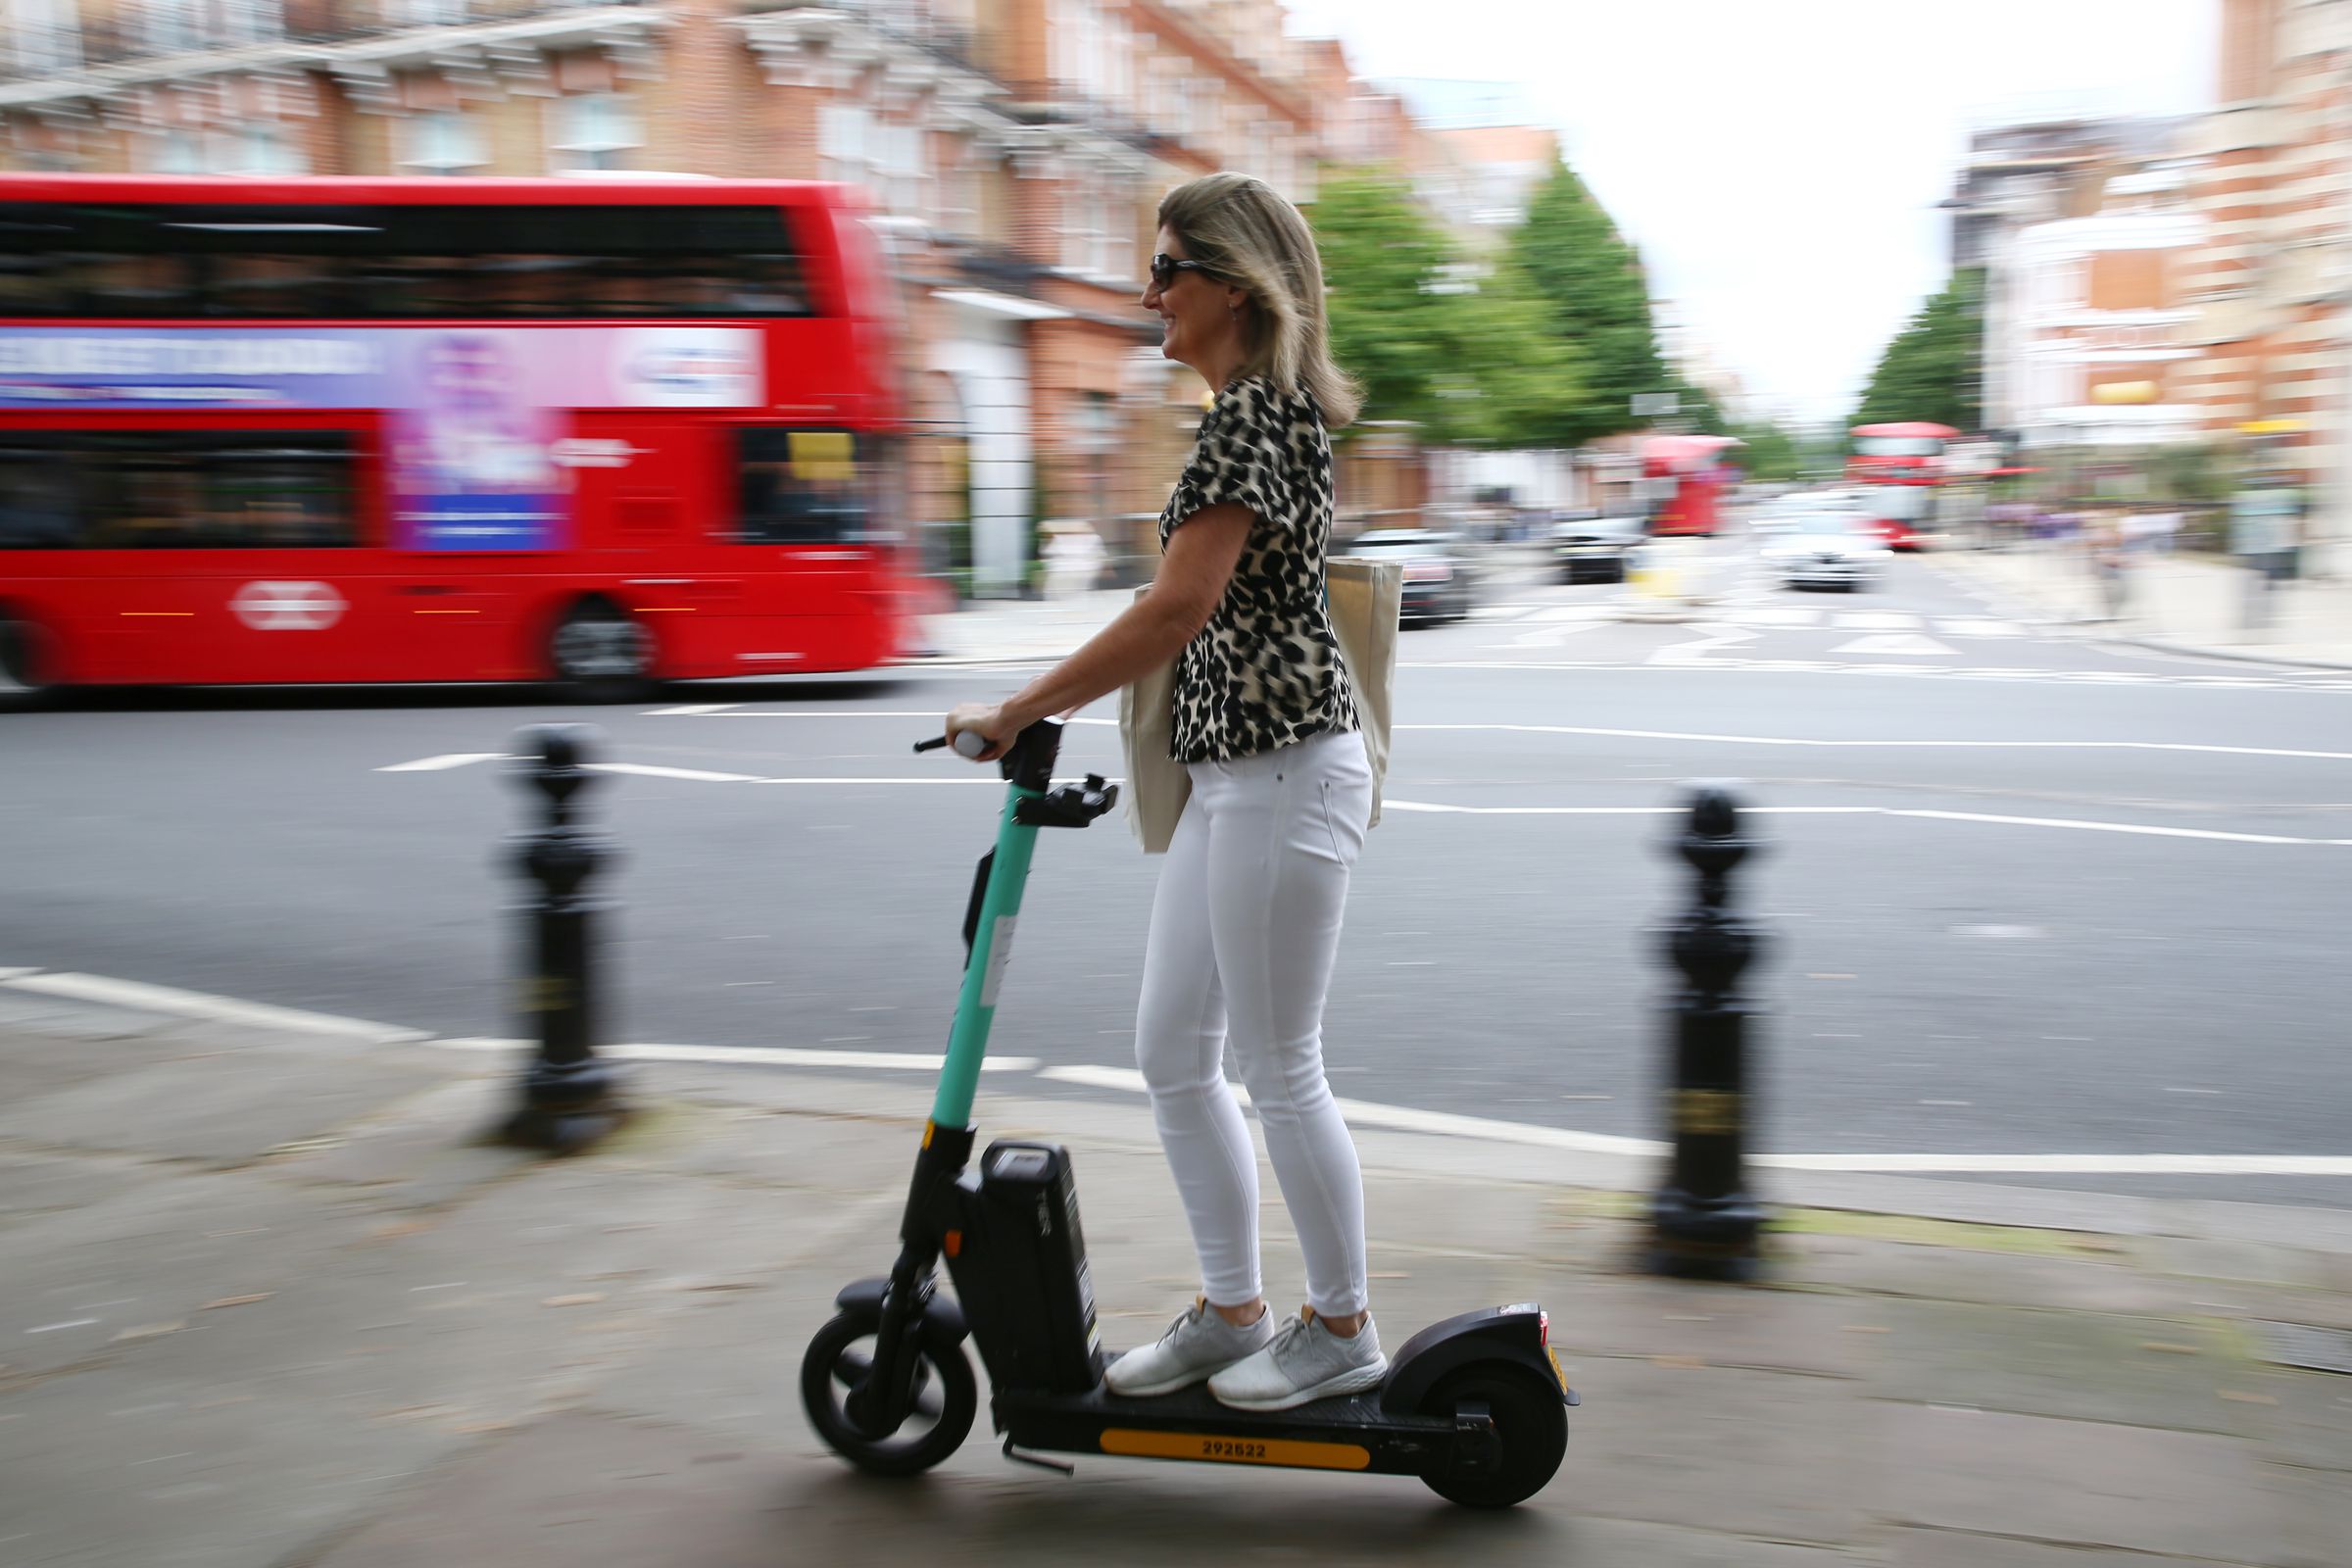 Europe’s Leading E-Scooter Company Launches In Kensington